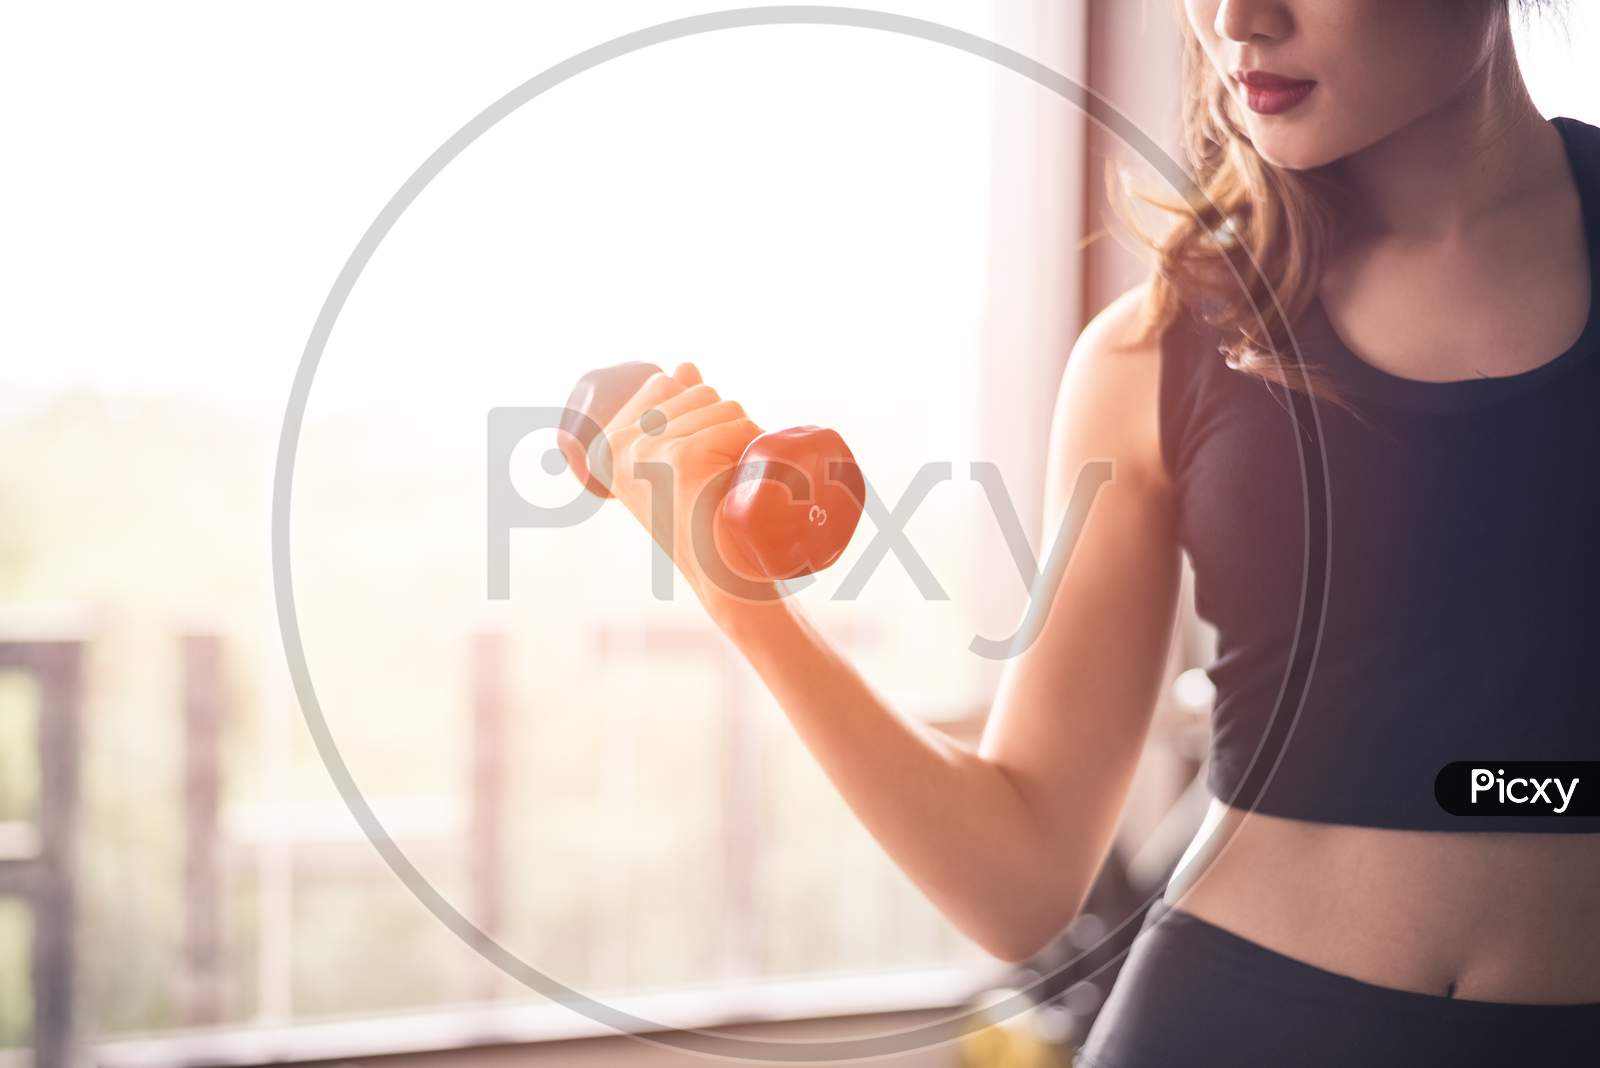 Hand Of Sports Woman Lifting Dumbbell For Weight Training Near Window By Right Hand For Pumping Biceps Muscle. Workout And Body Build Up Concept. Indoor Exercise Gym And Healthcare Theme